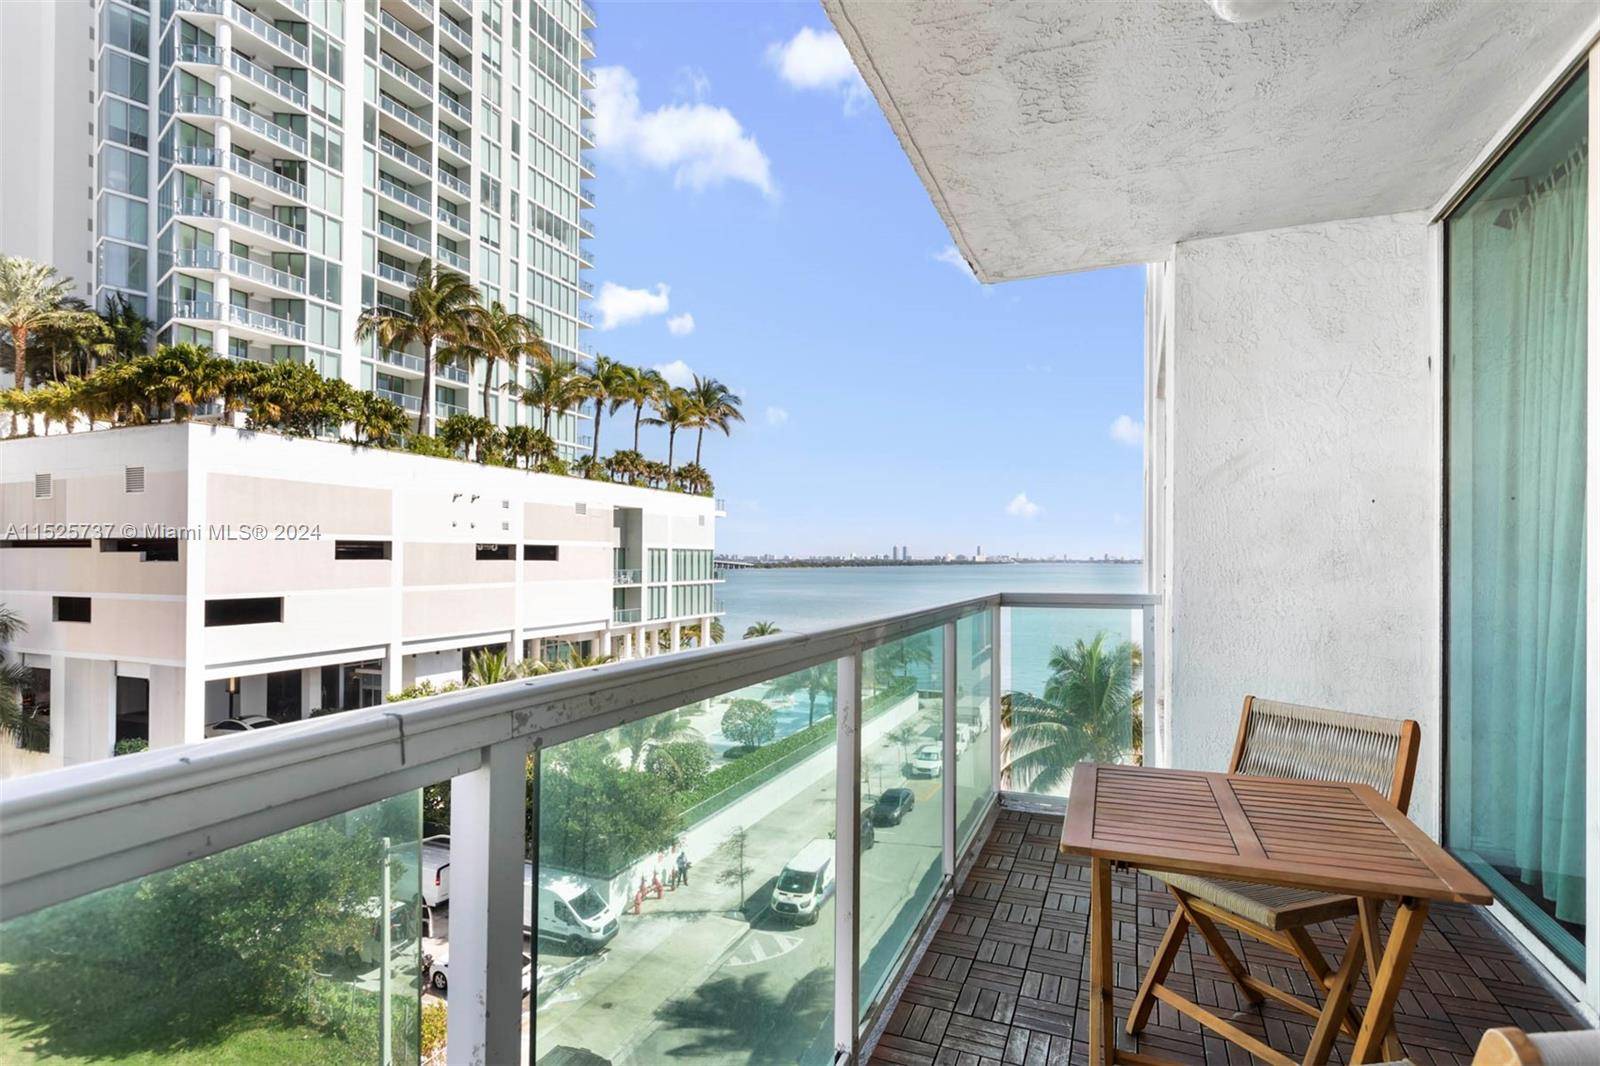 Indulge in luxury with this stunning 1 bed, 1 bath residence featuring breathtaking bay views, a spacious balcony, and abundant natural light through floor to ceiling impact windows.